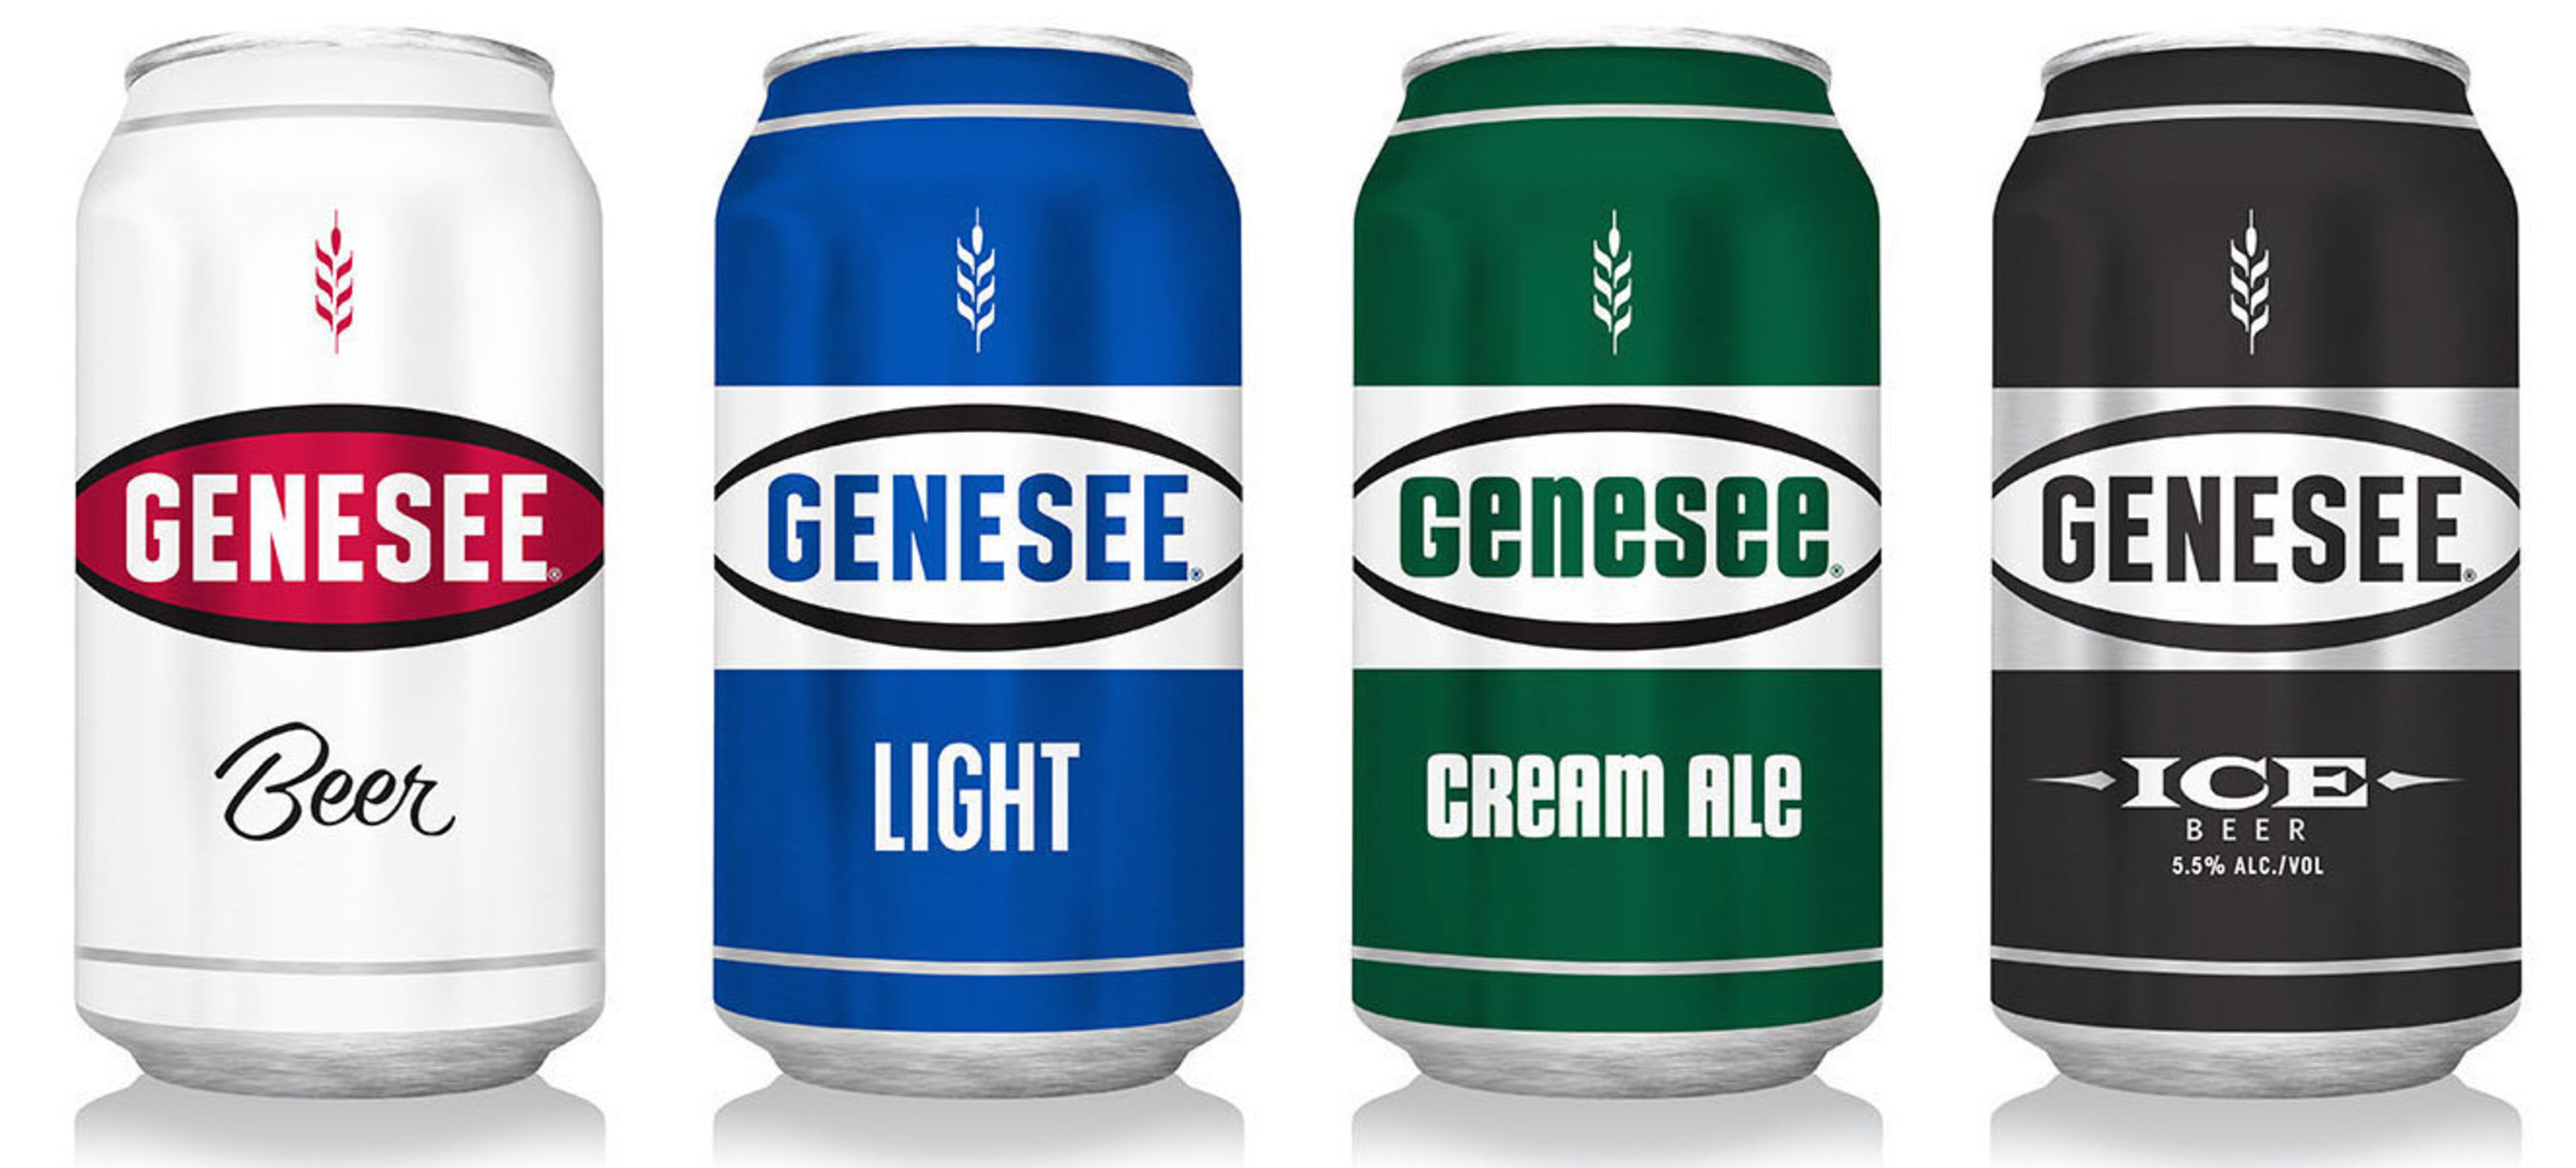 new-genesee-beer-packaging-reflects-brand-s-authenticity